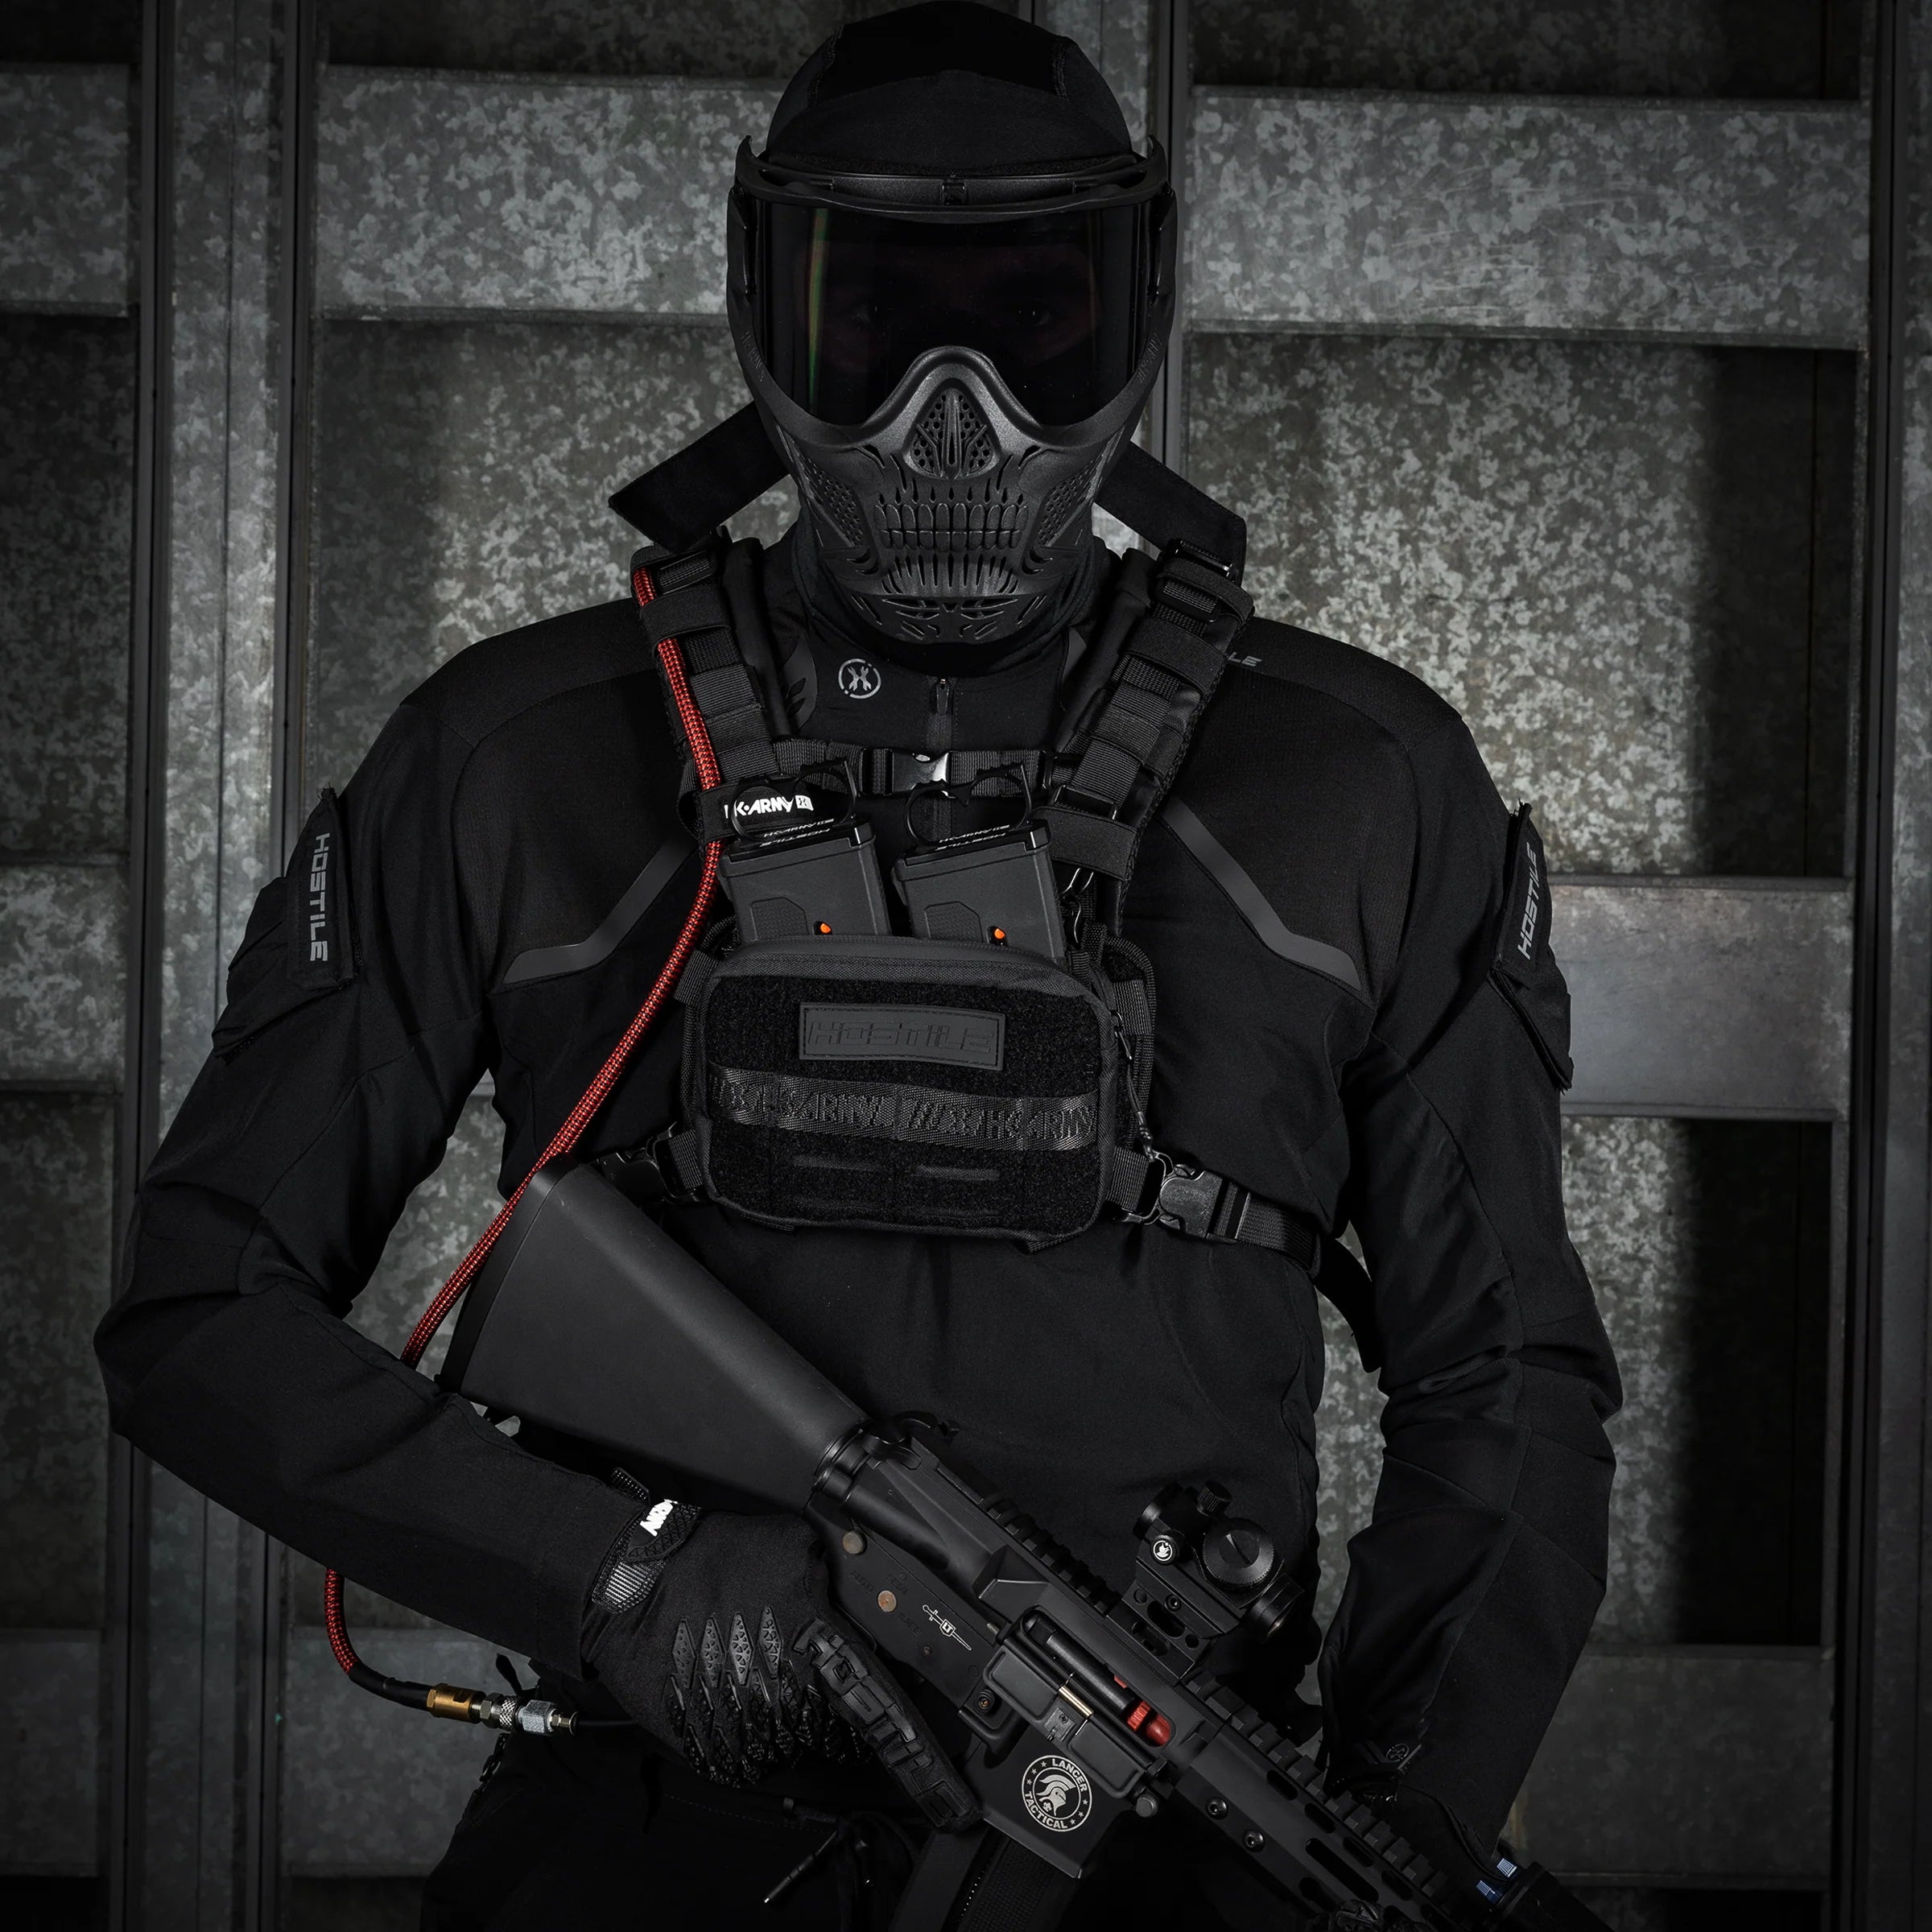 HK Army CTS Reflex Backpack - ssairsoft